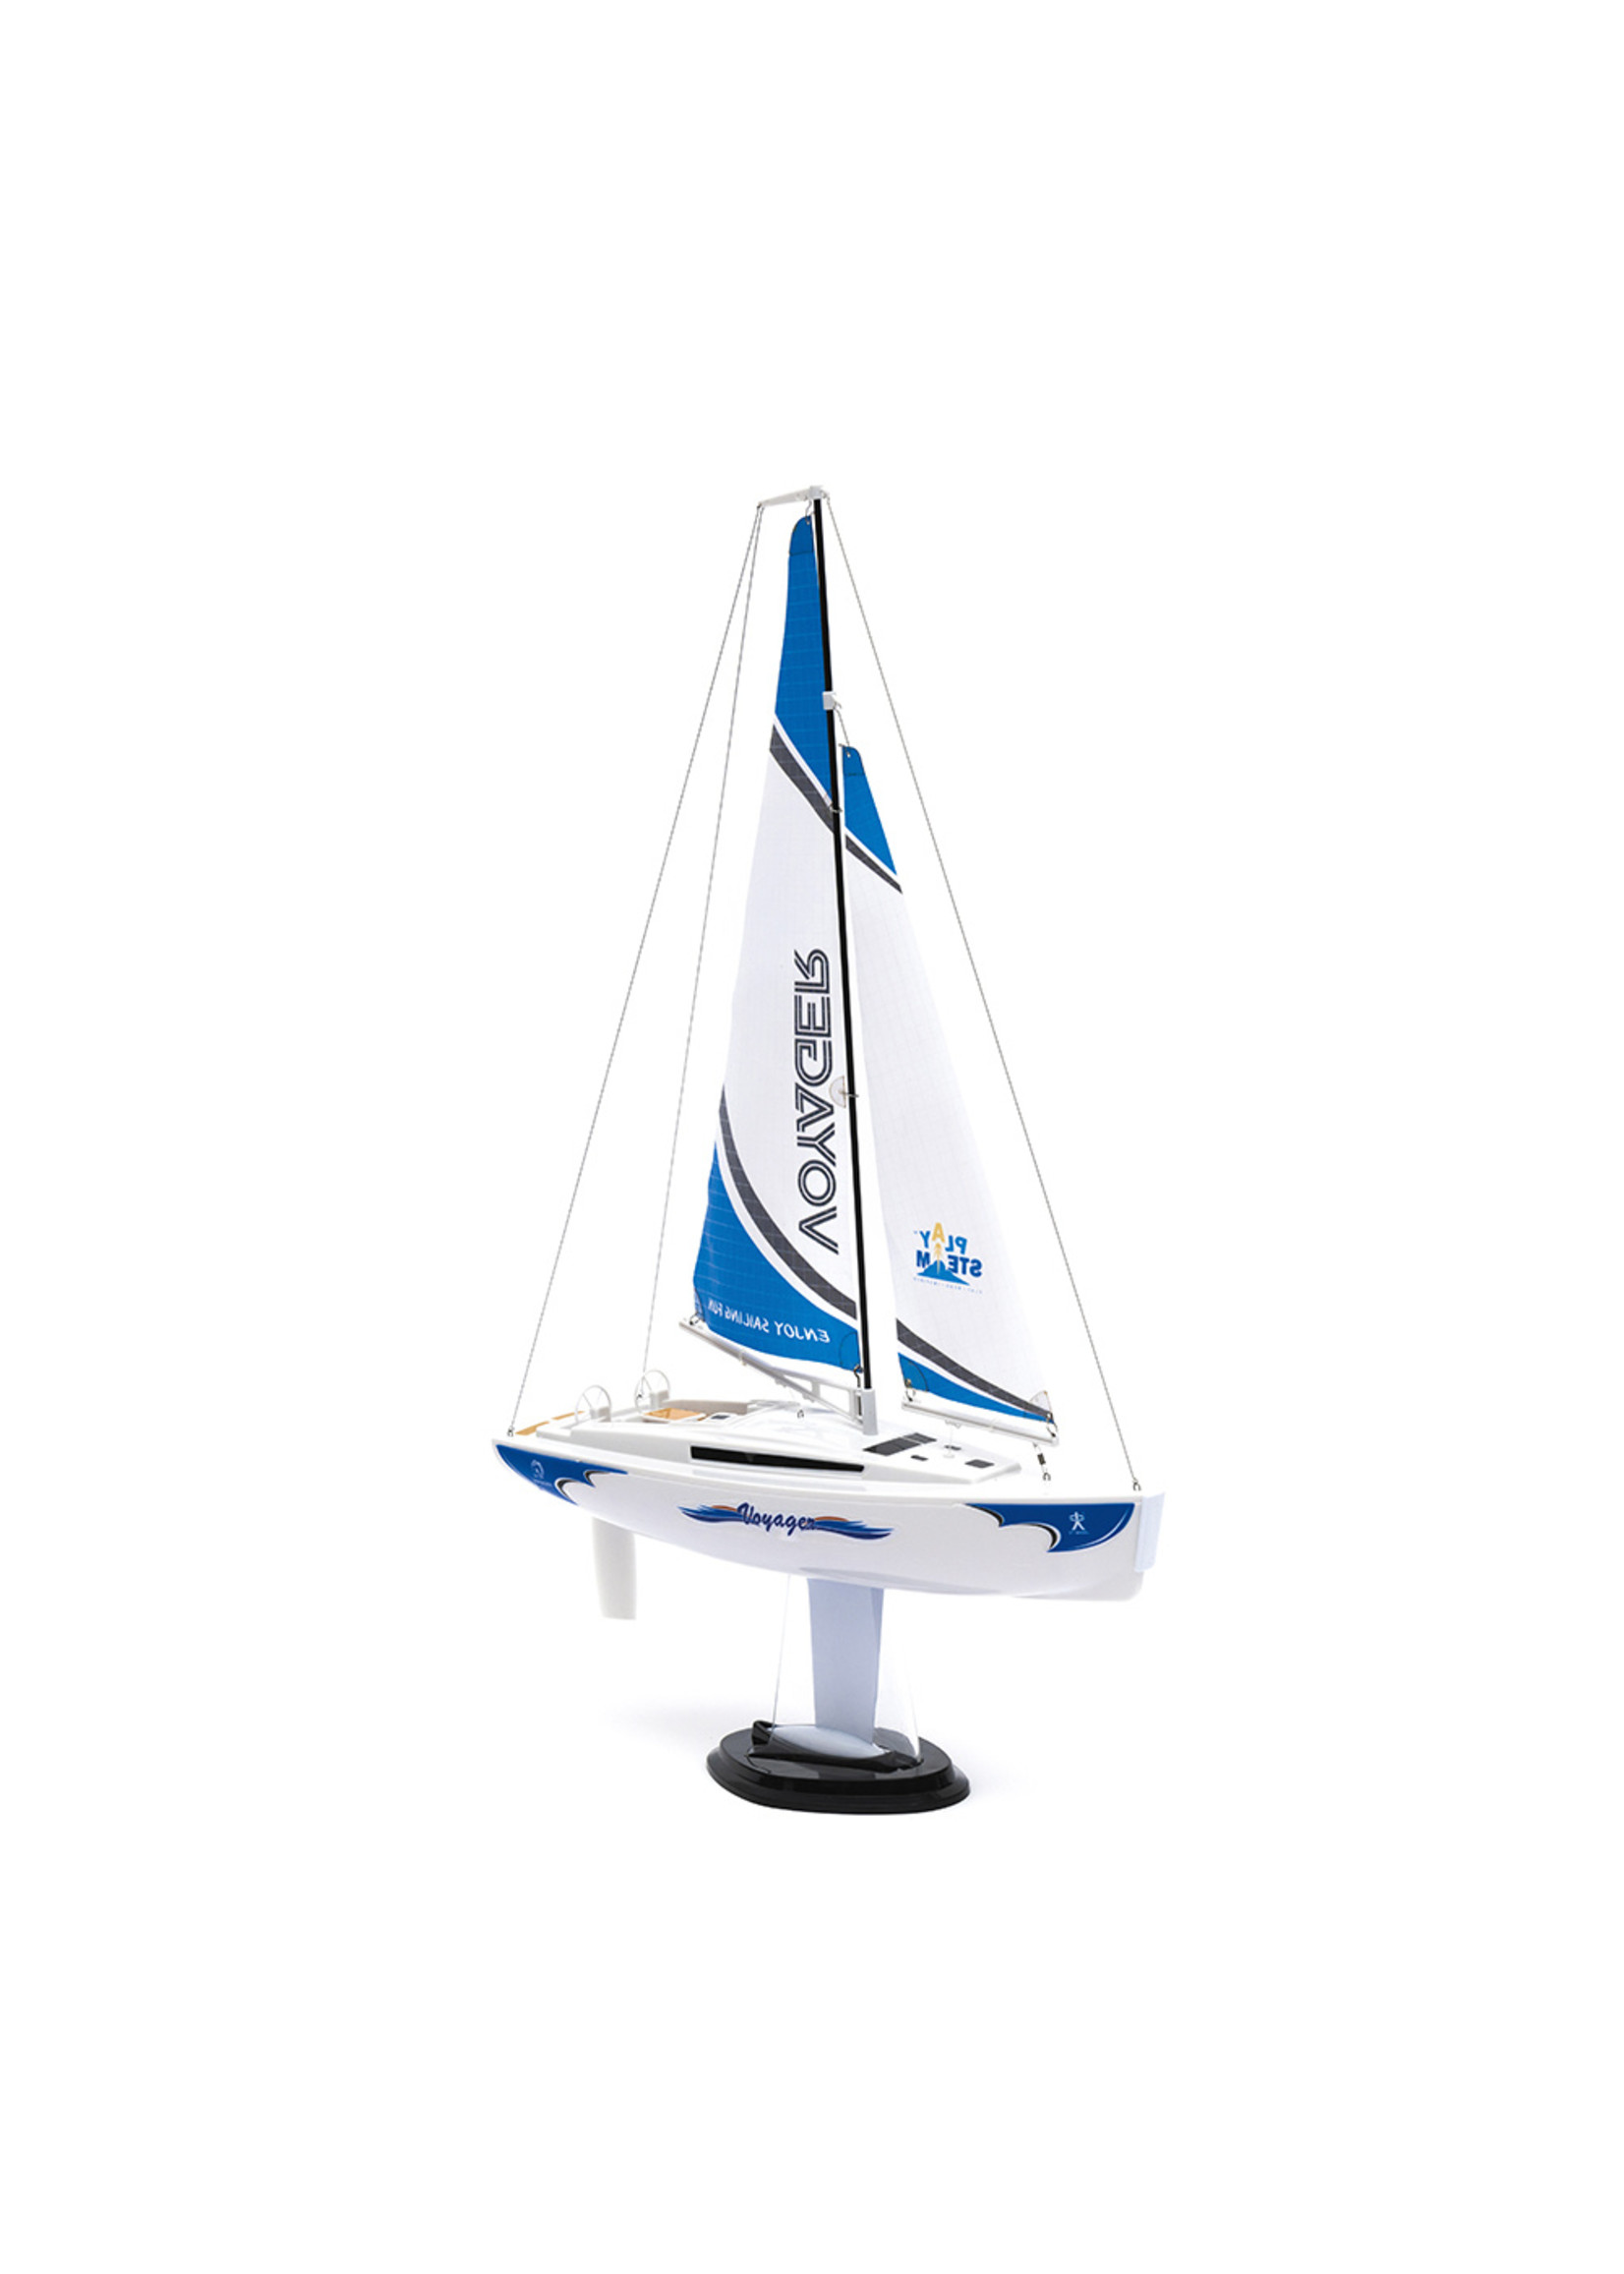 Play Steam Voyager 280 Wind-Power RC Sailboat - Blue